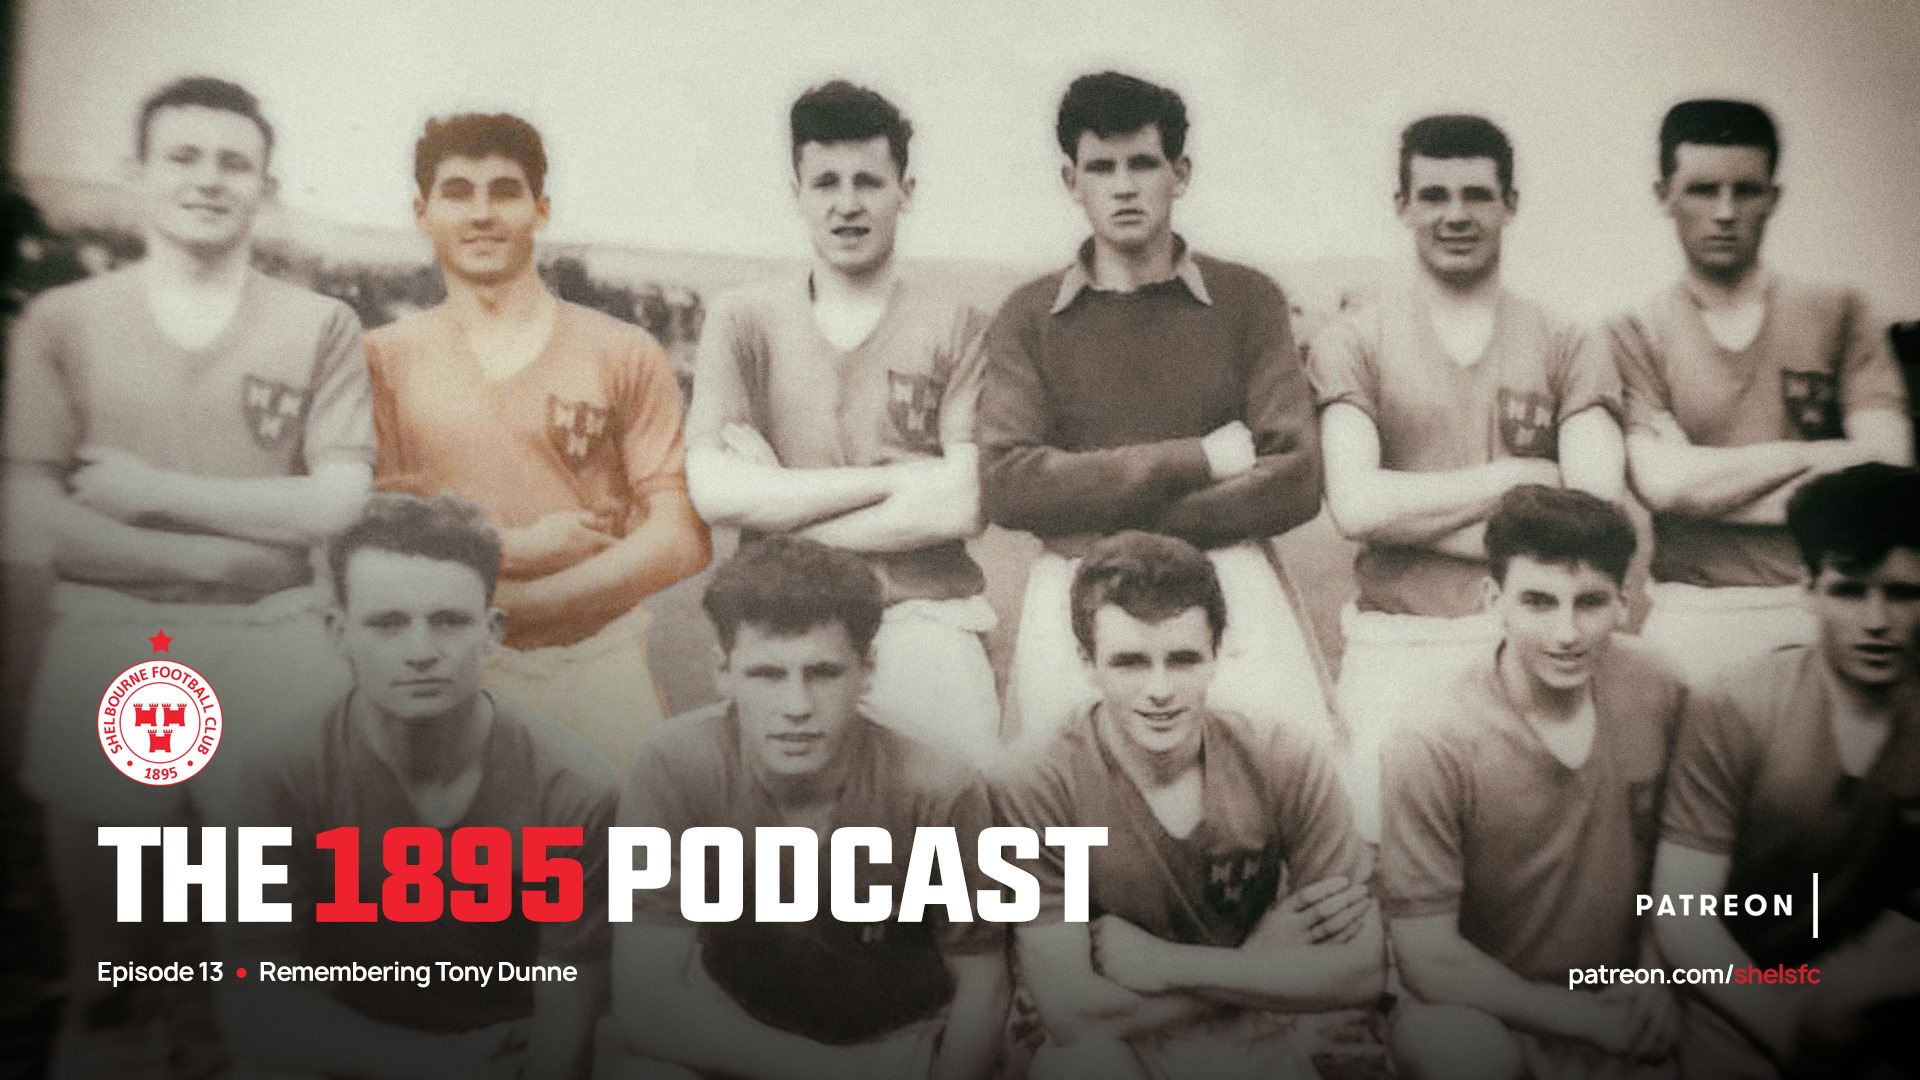 The 1895 Podcast | The Tony Dunne Episode